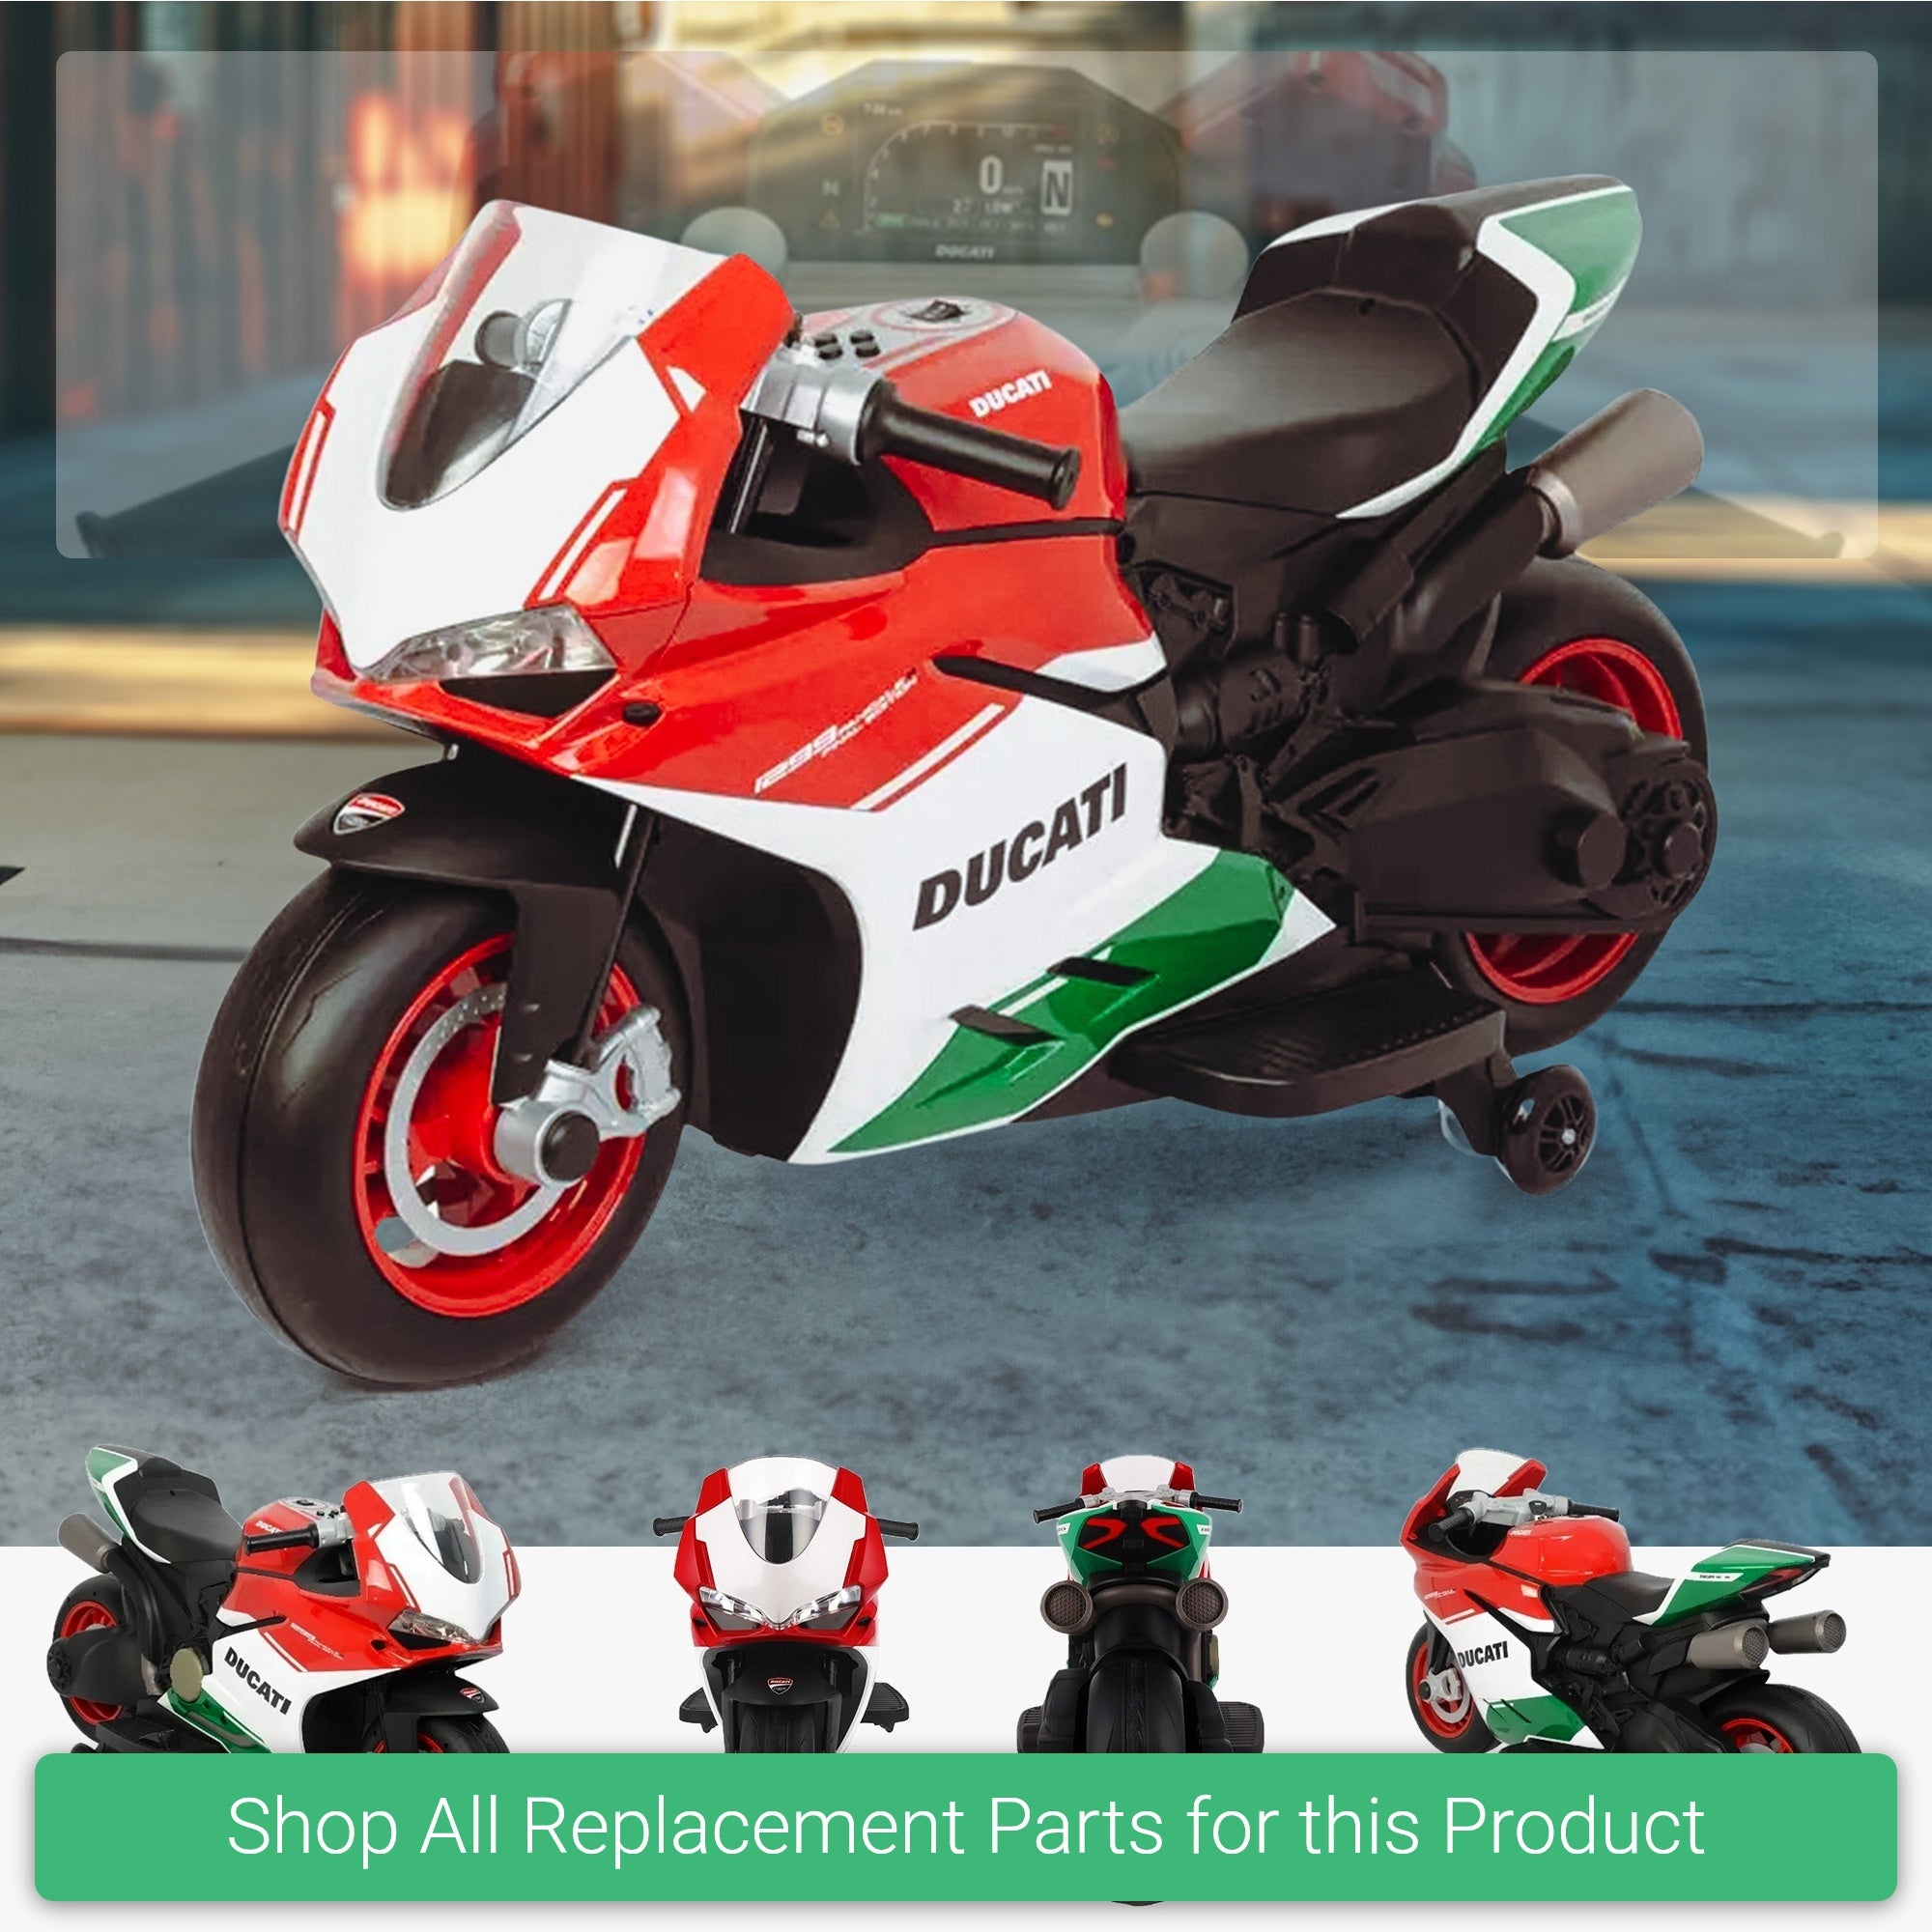 Replacement Parts and Spares for Kids Ducati 1299 Panigale 12V Motorbike - DUCATI-1299 - 2138A